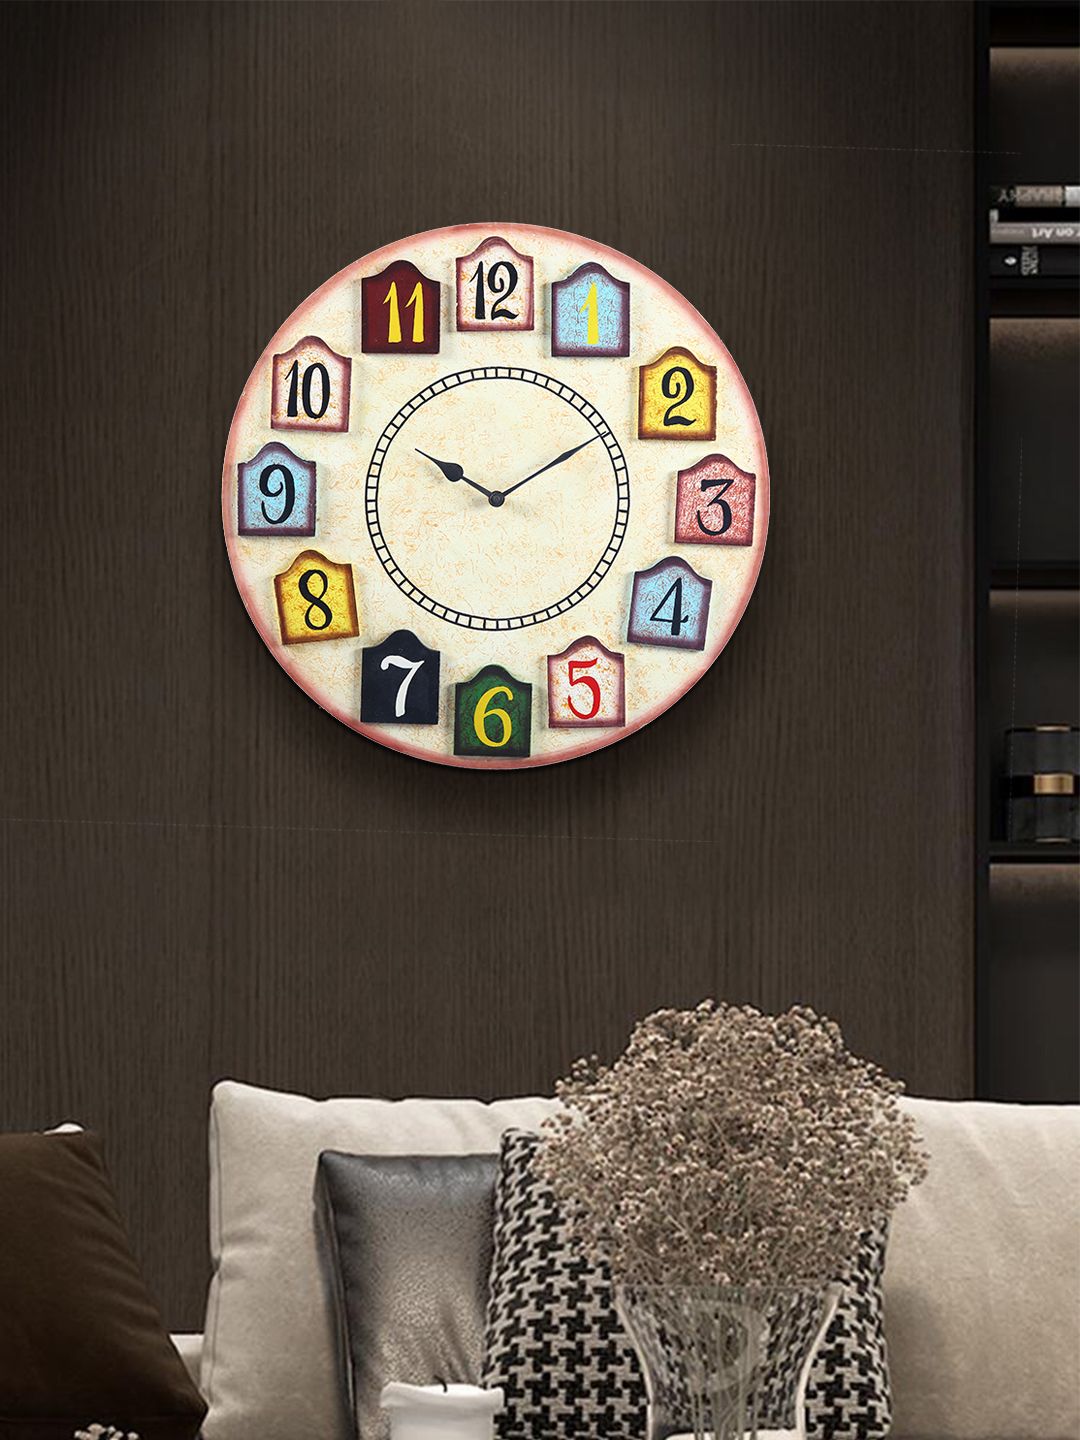 Aapno Rajasthan White & Yellow Printed Contemporary Wall Clock Price in India